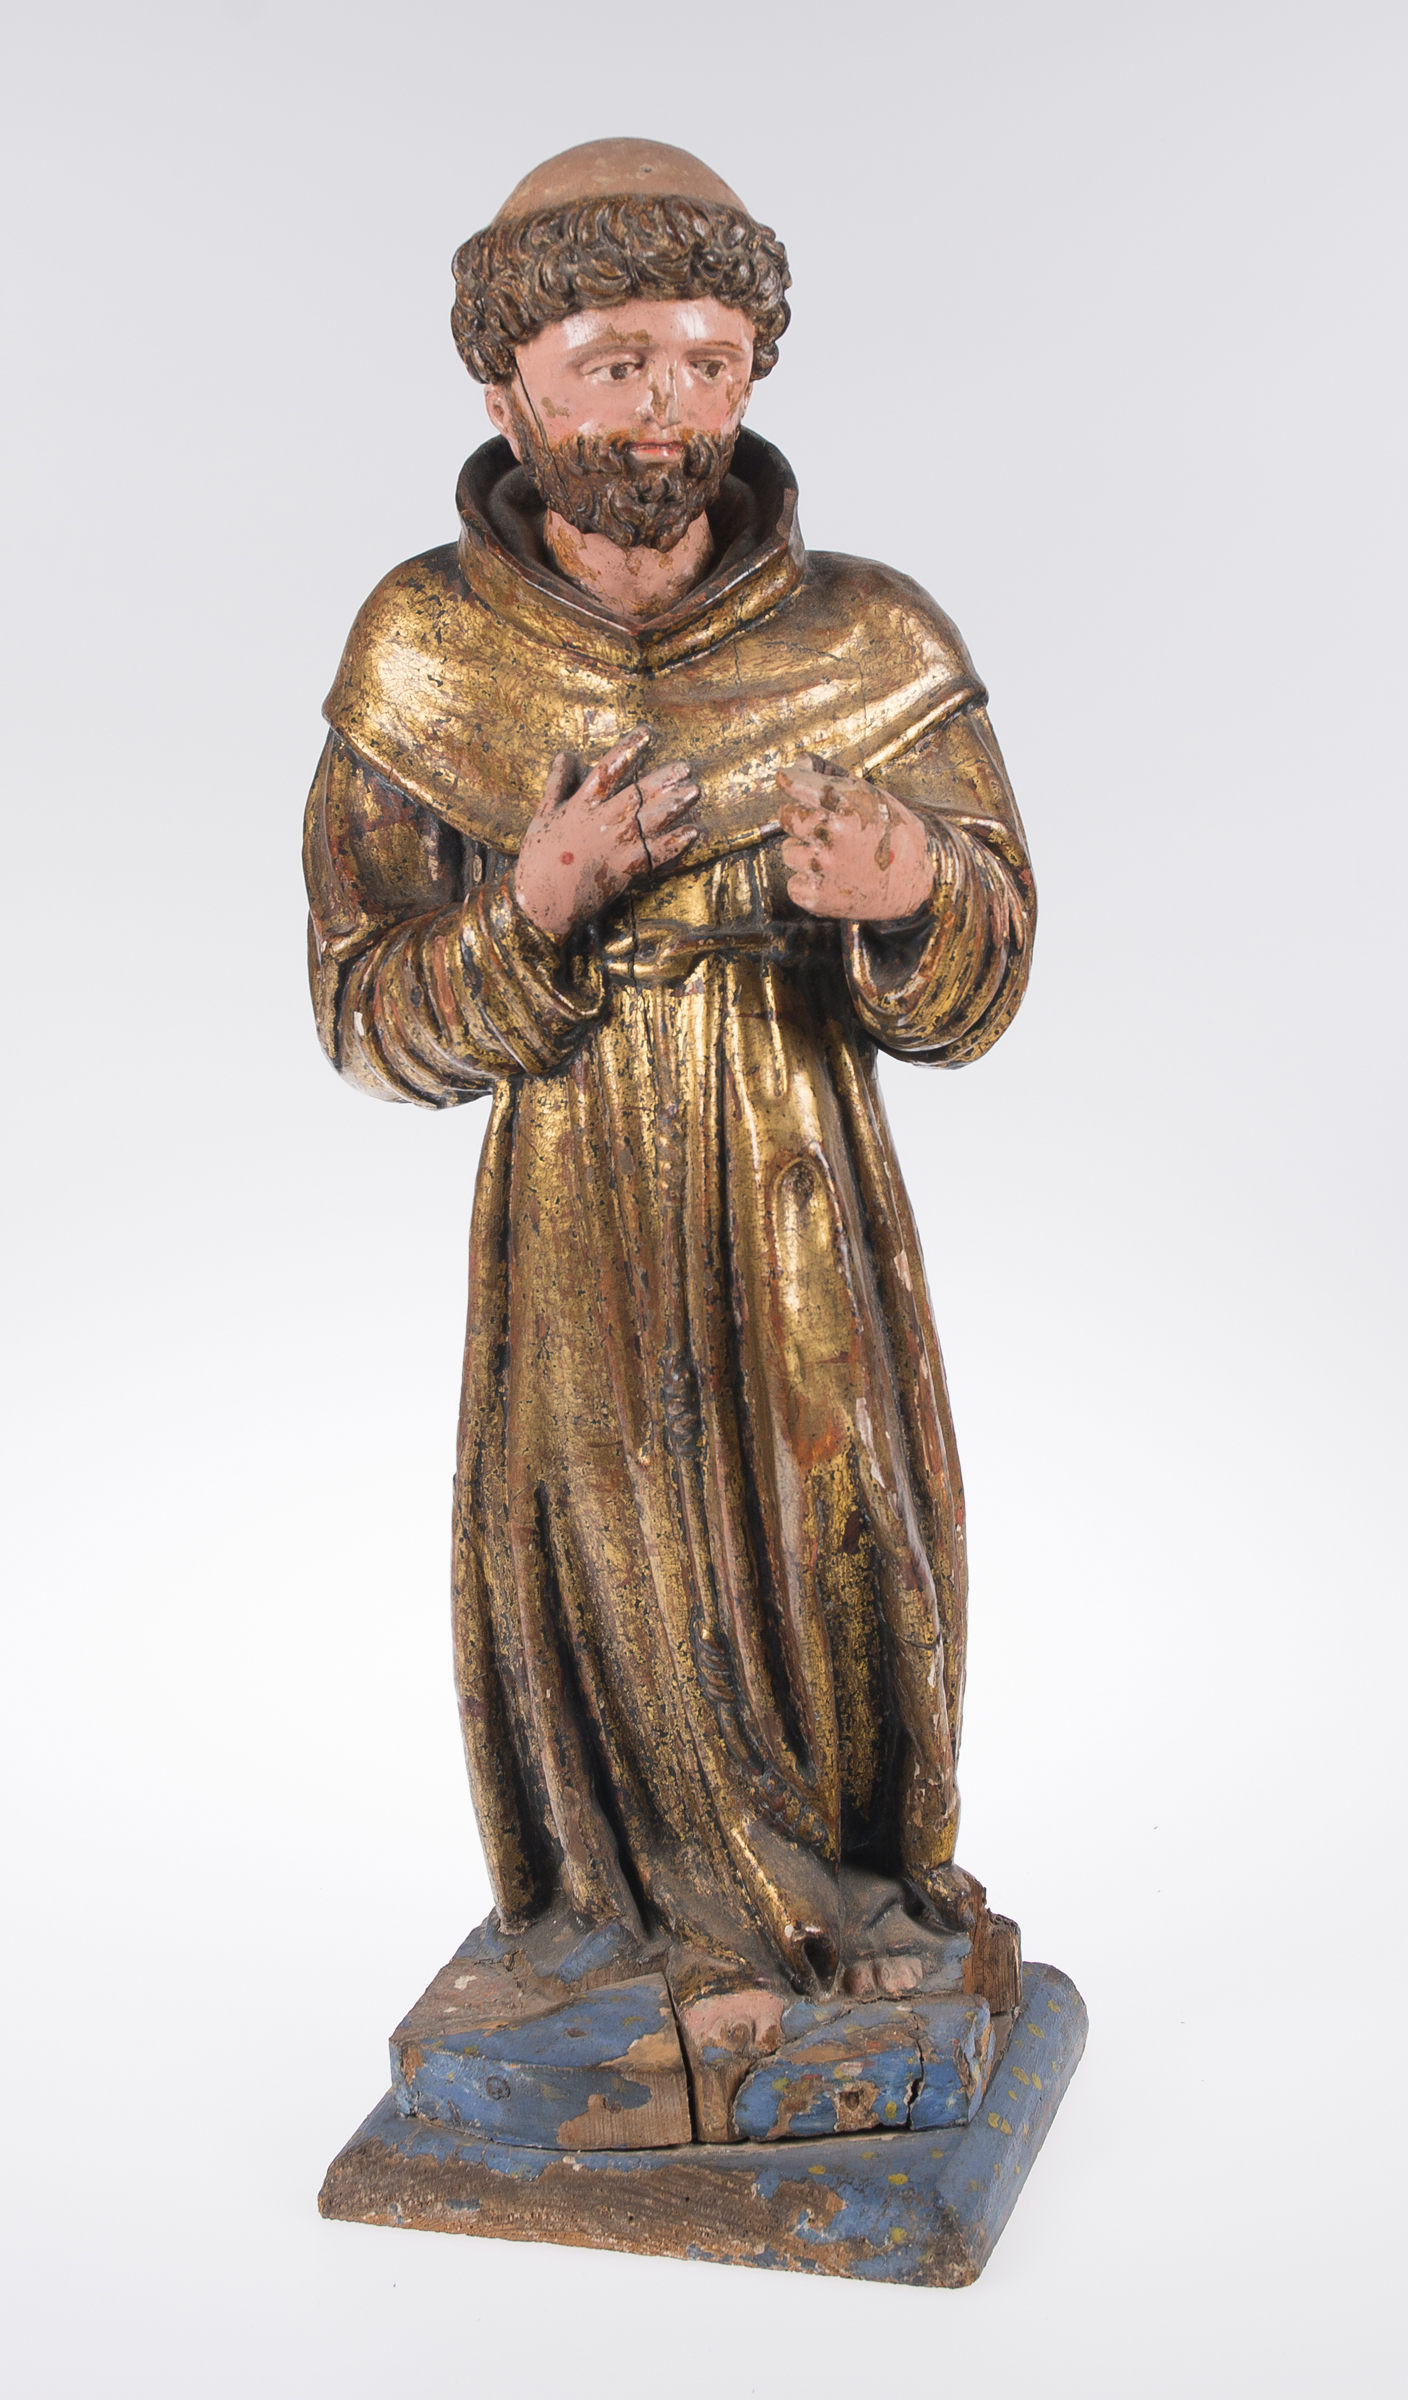 "Saint". Carved and polychromed wooden sculpture. 16th century.